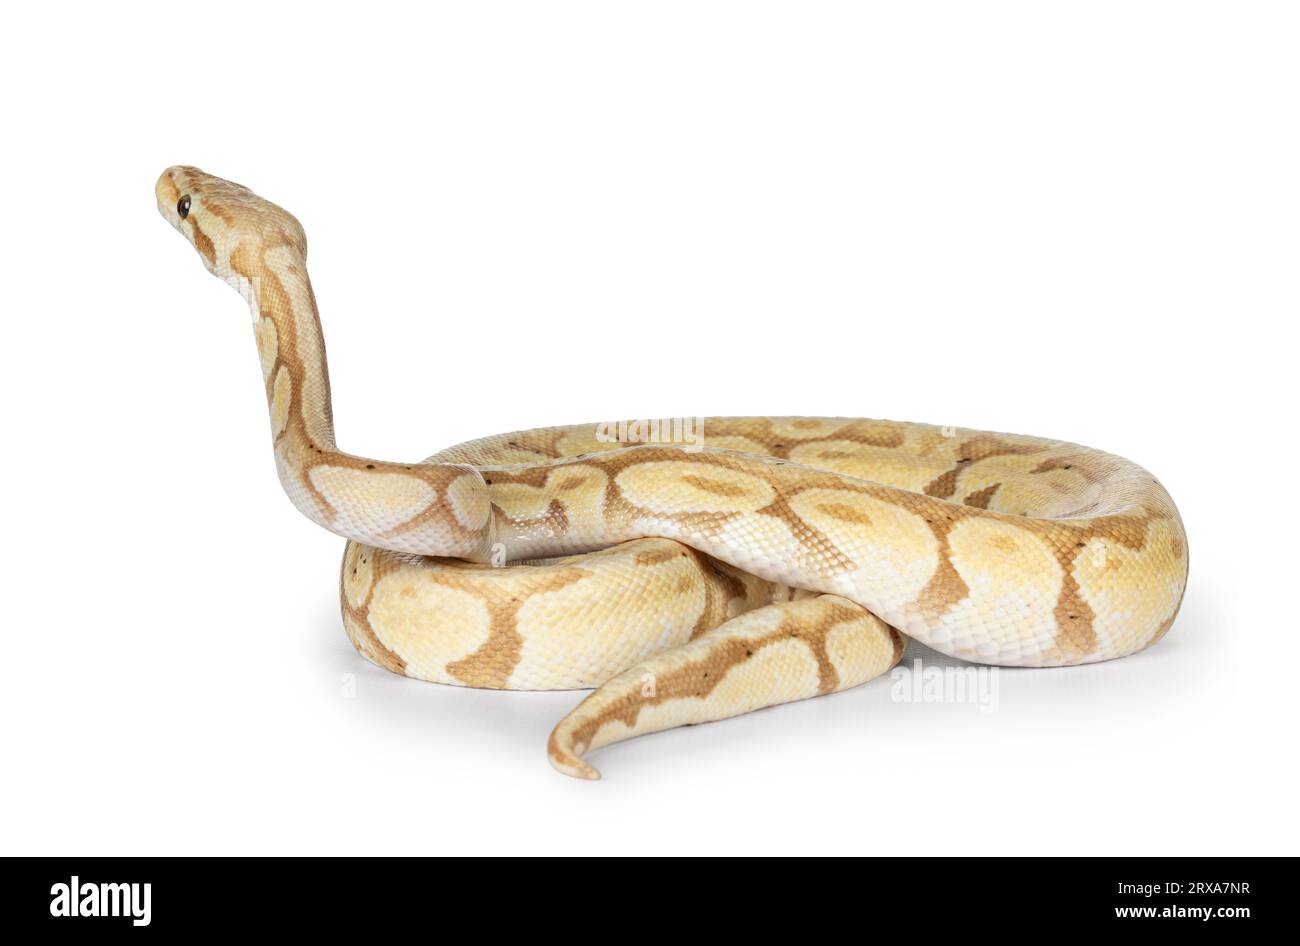 Cute yellowish ball python, curled up. Head hig up looking away from camera. Isolated on a white background. Stock Photo